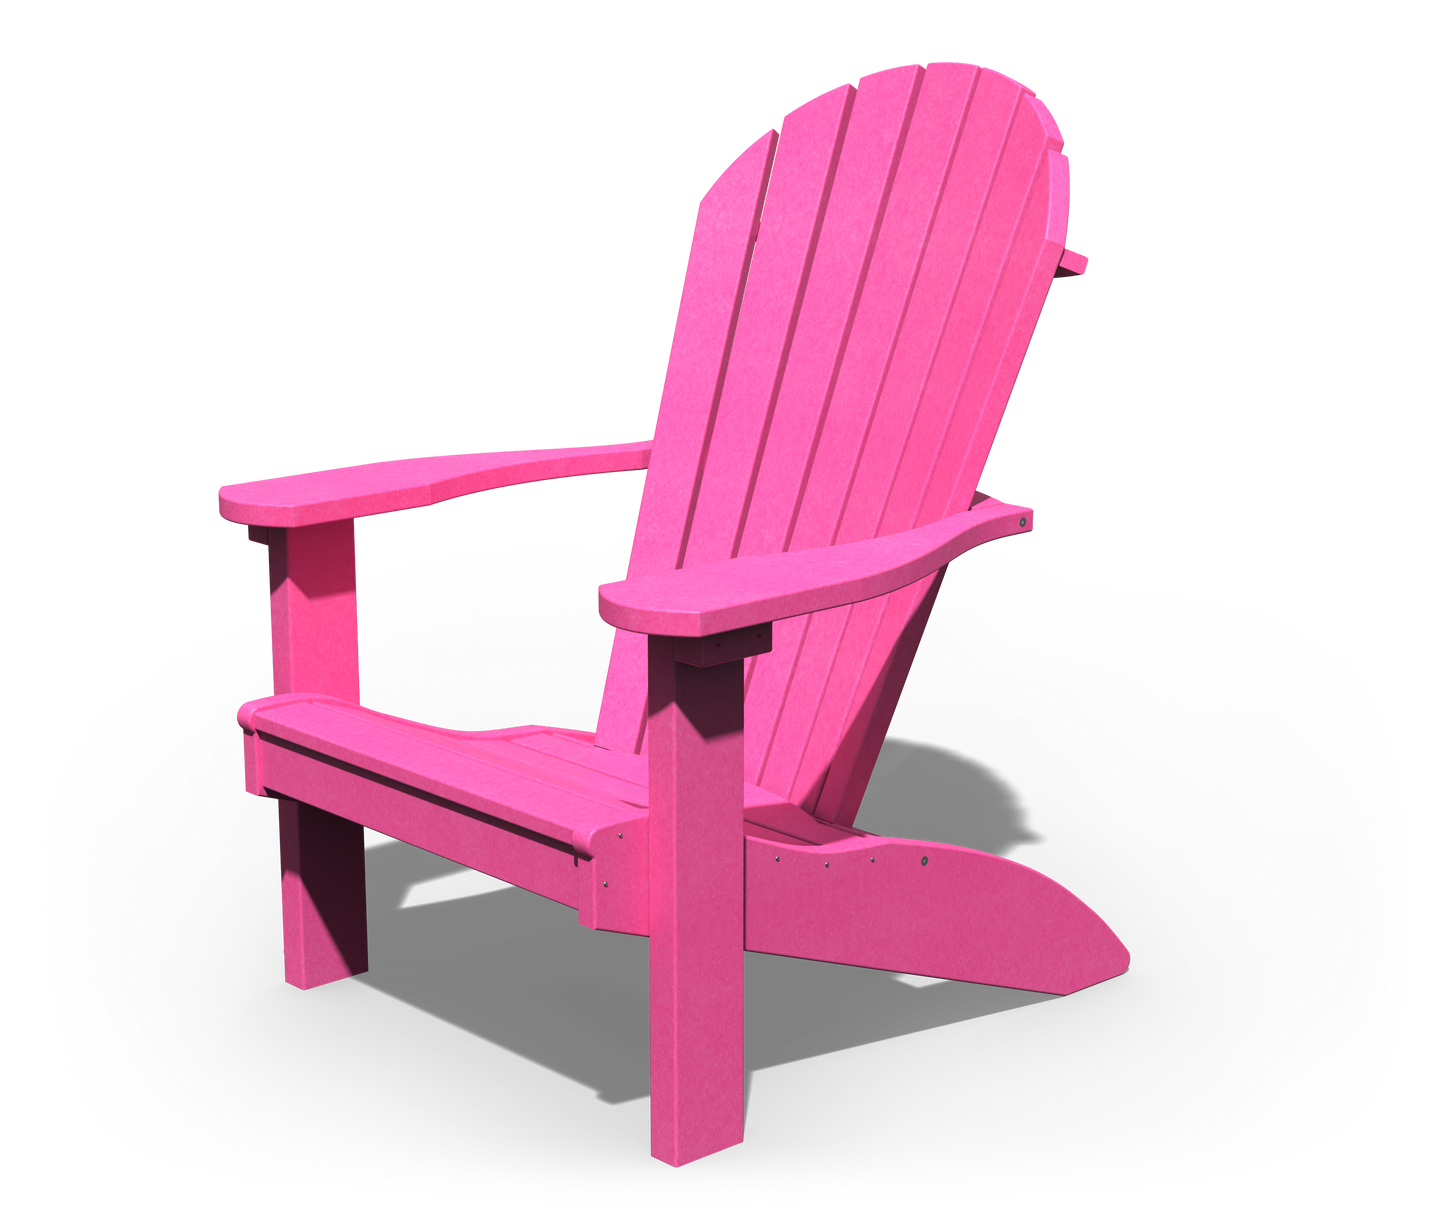 Patiova Recycled Plastic Amish Crafted Adirondack Chair - LEAD TIME TO SHIP 4 WEEKS